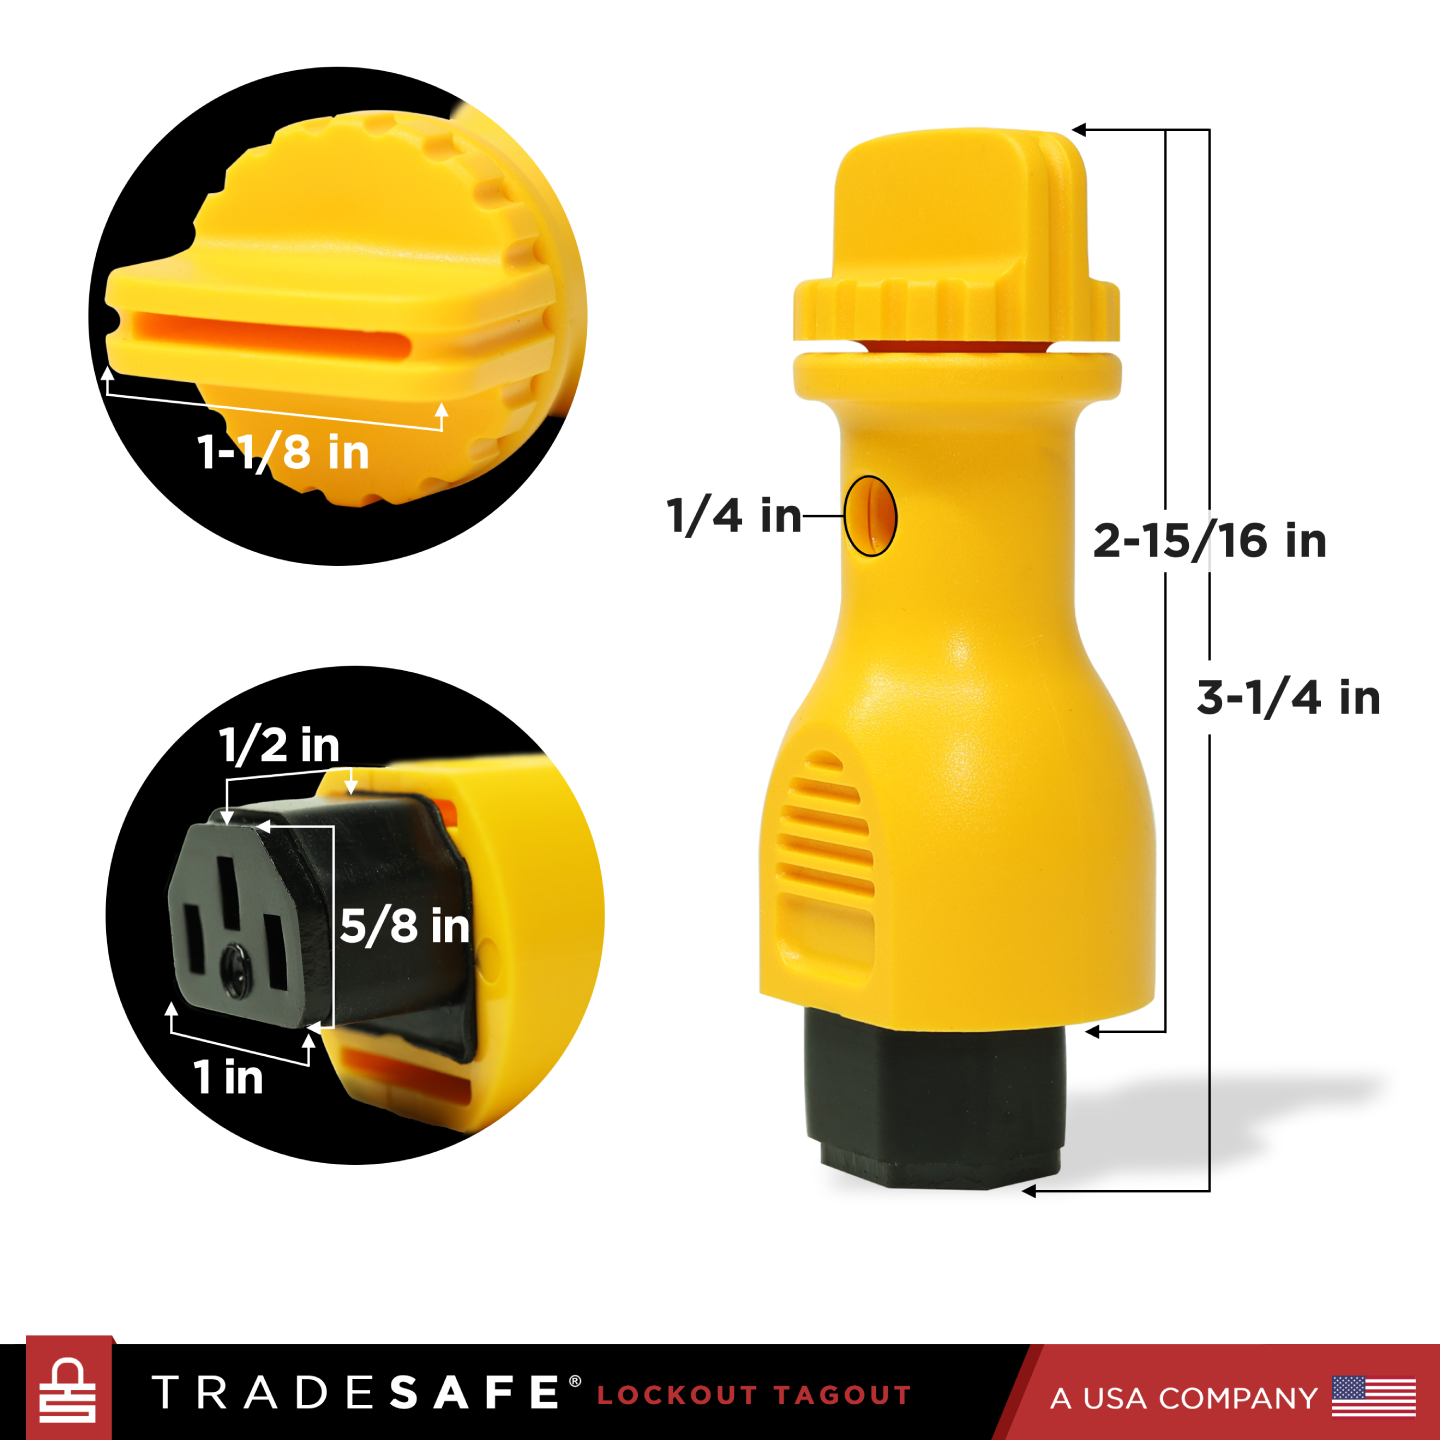 infographic: power plug lock dimensions - 1/4 in padlock hole, 3-1/4 in body length, 1-1/8 in width